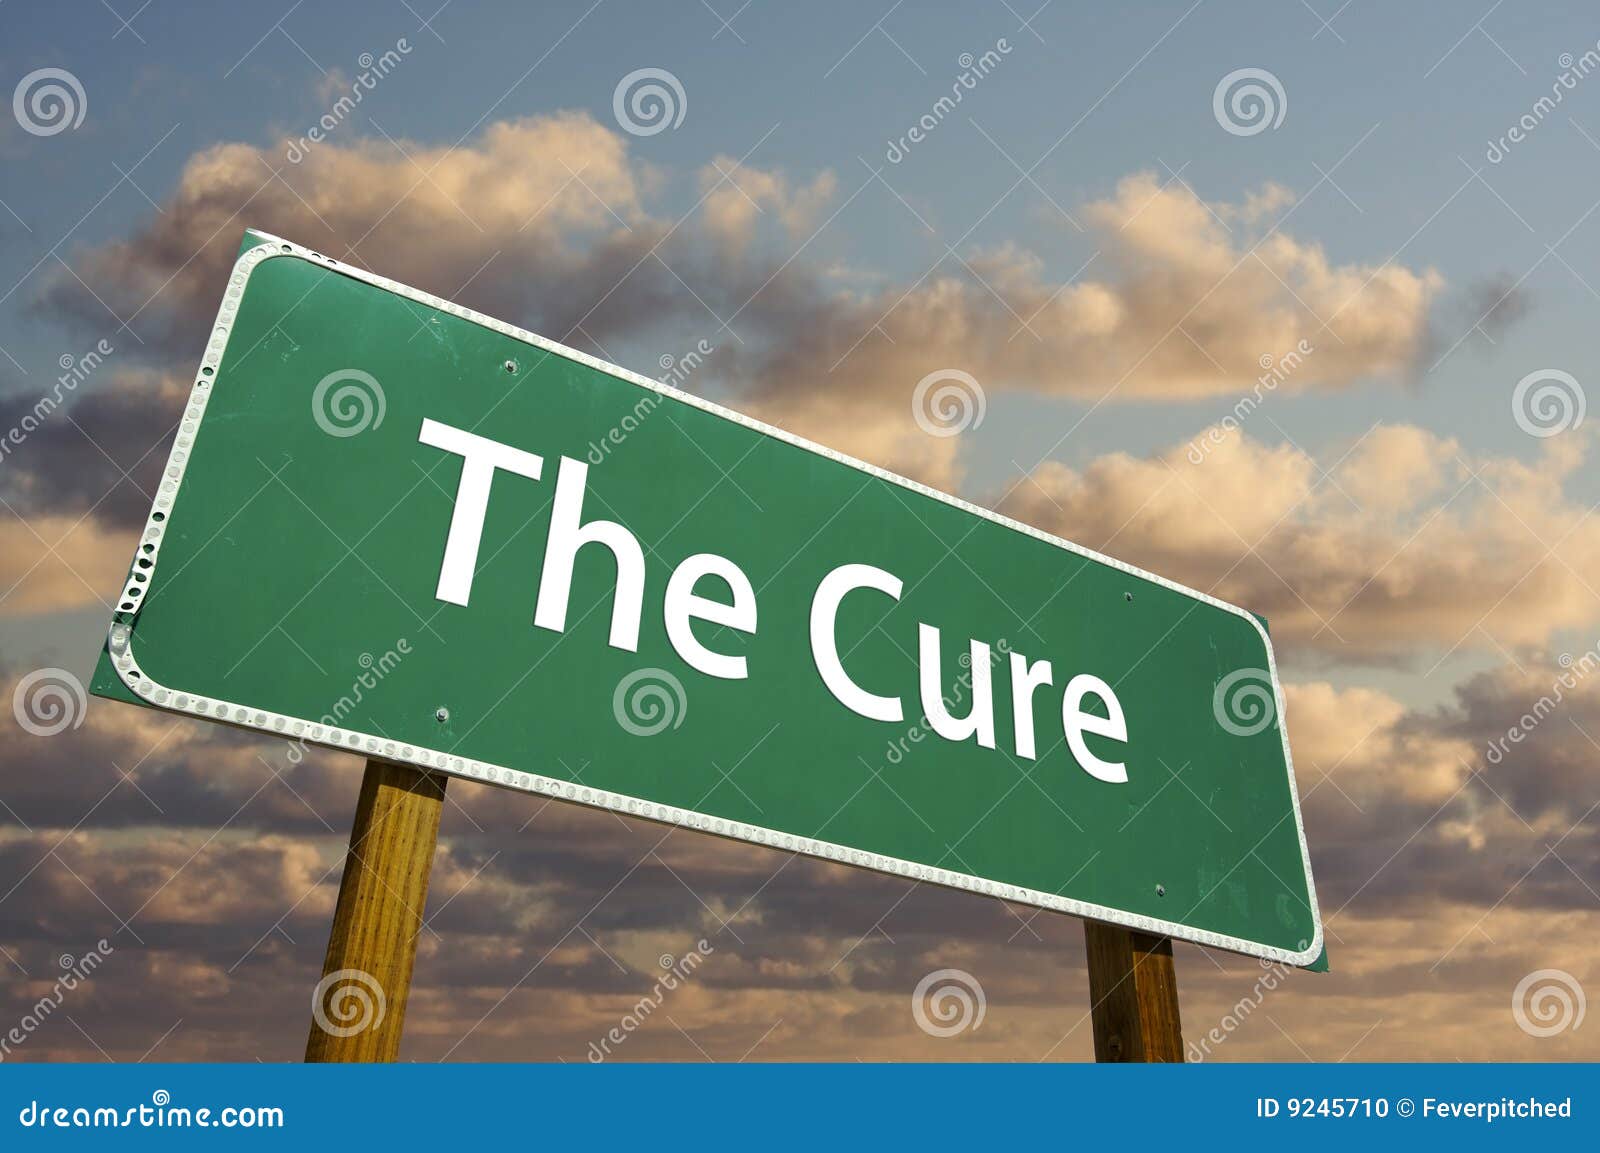 the cure green road sign